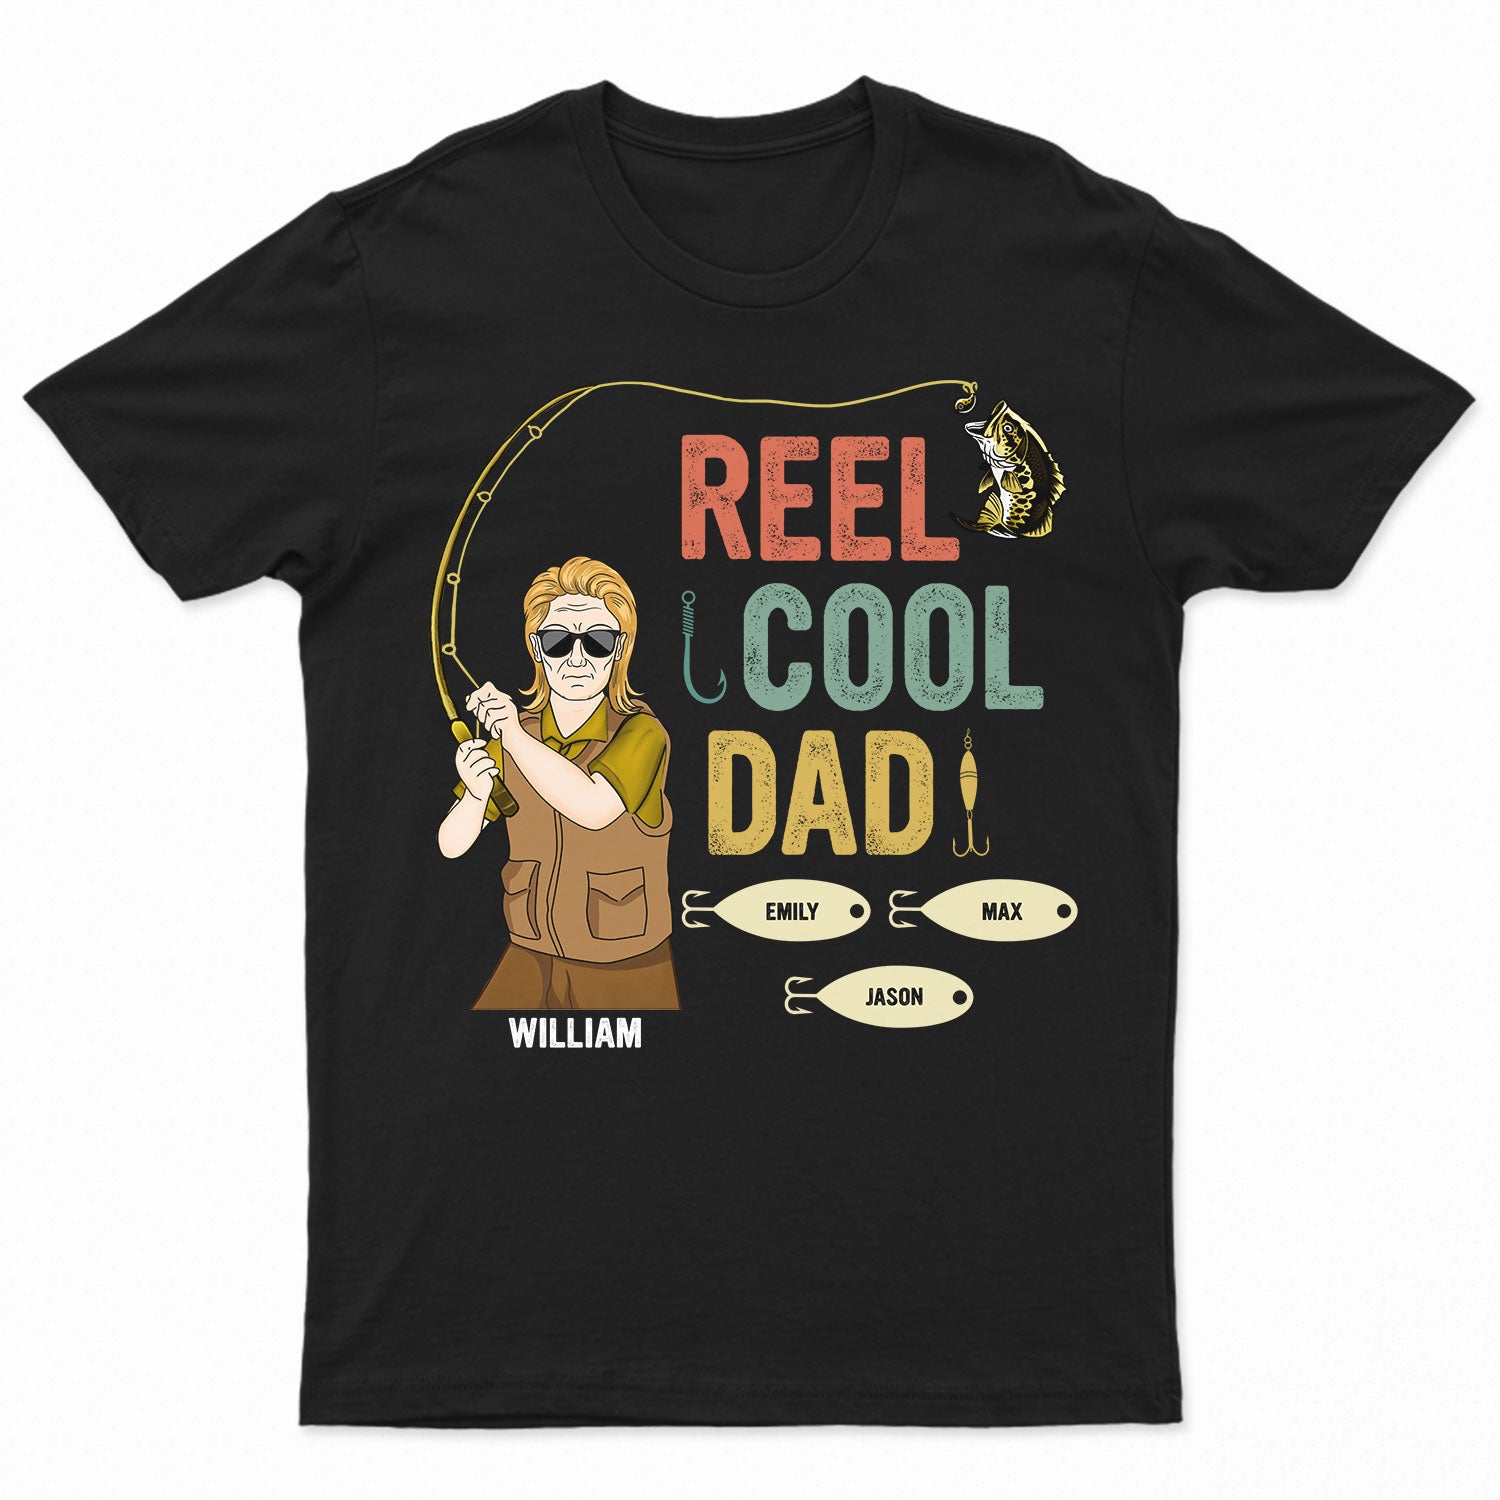 Reel Cool Dad - Birthday, Family Gift For Father, Grandpa, Husband, Fishers, Fishing Lovers - Personalized Custom T Shirt